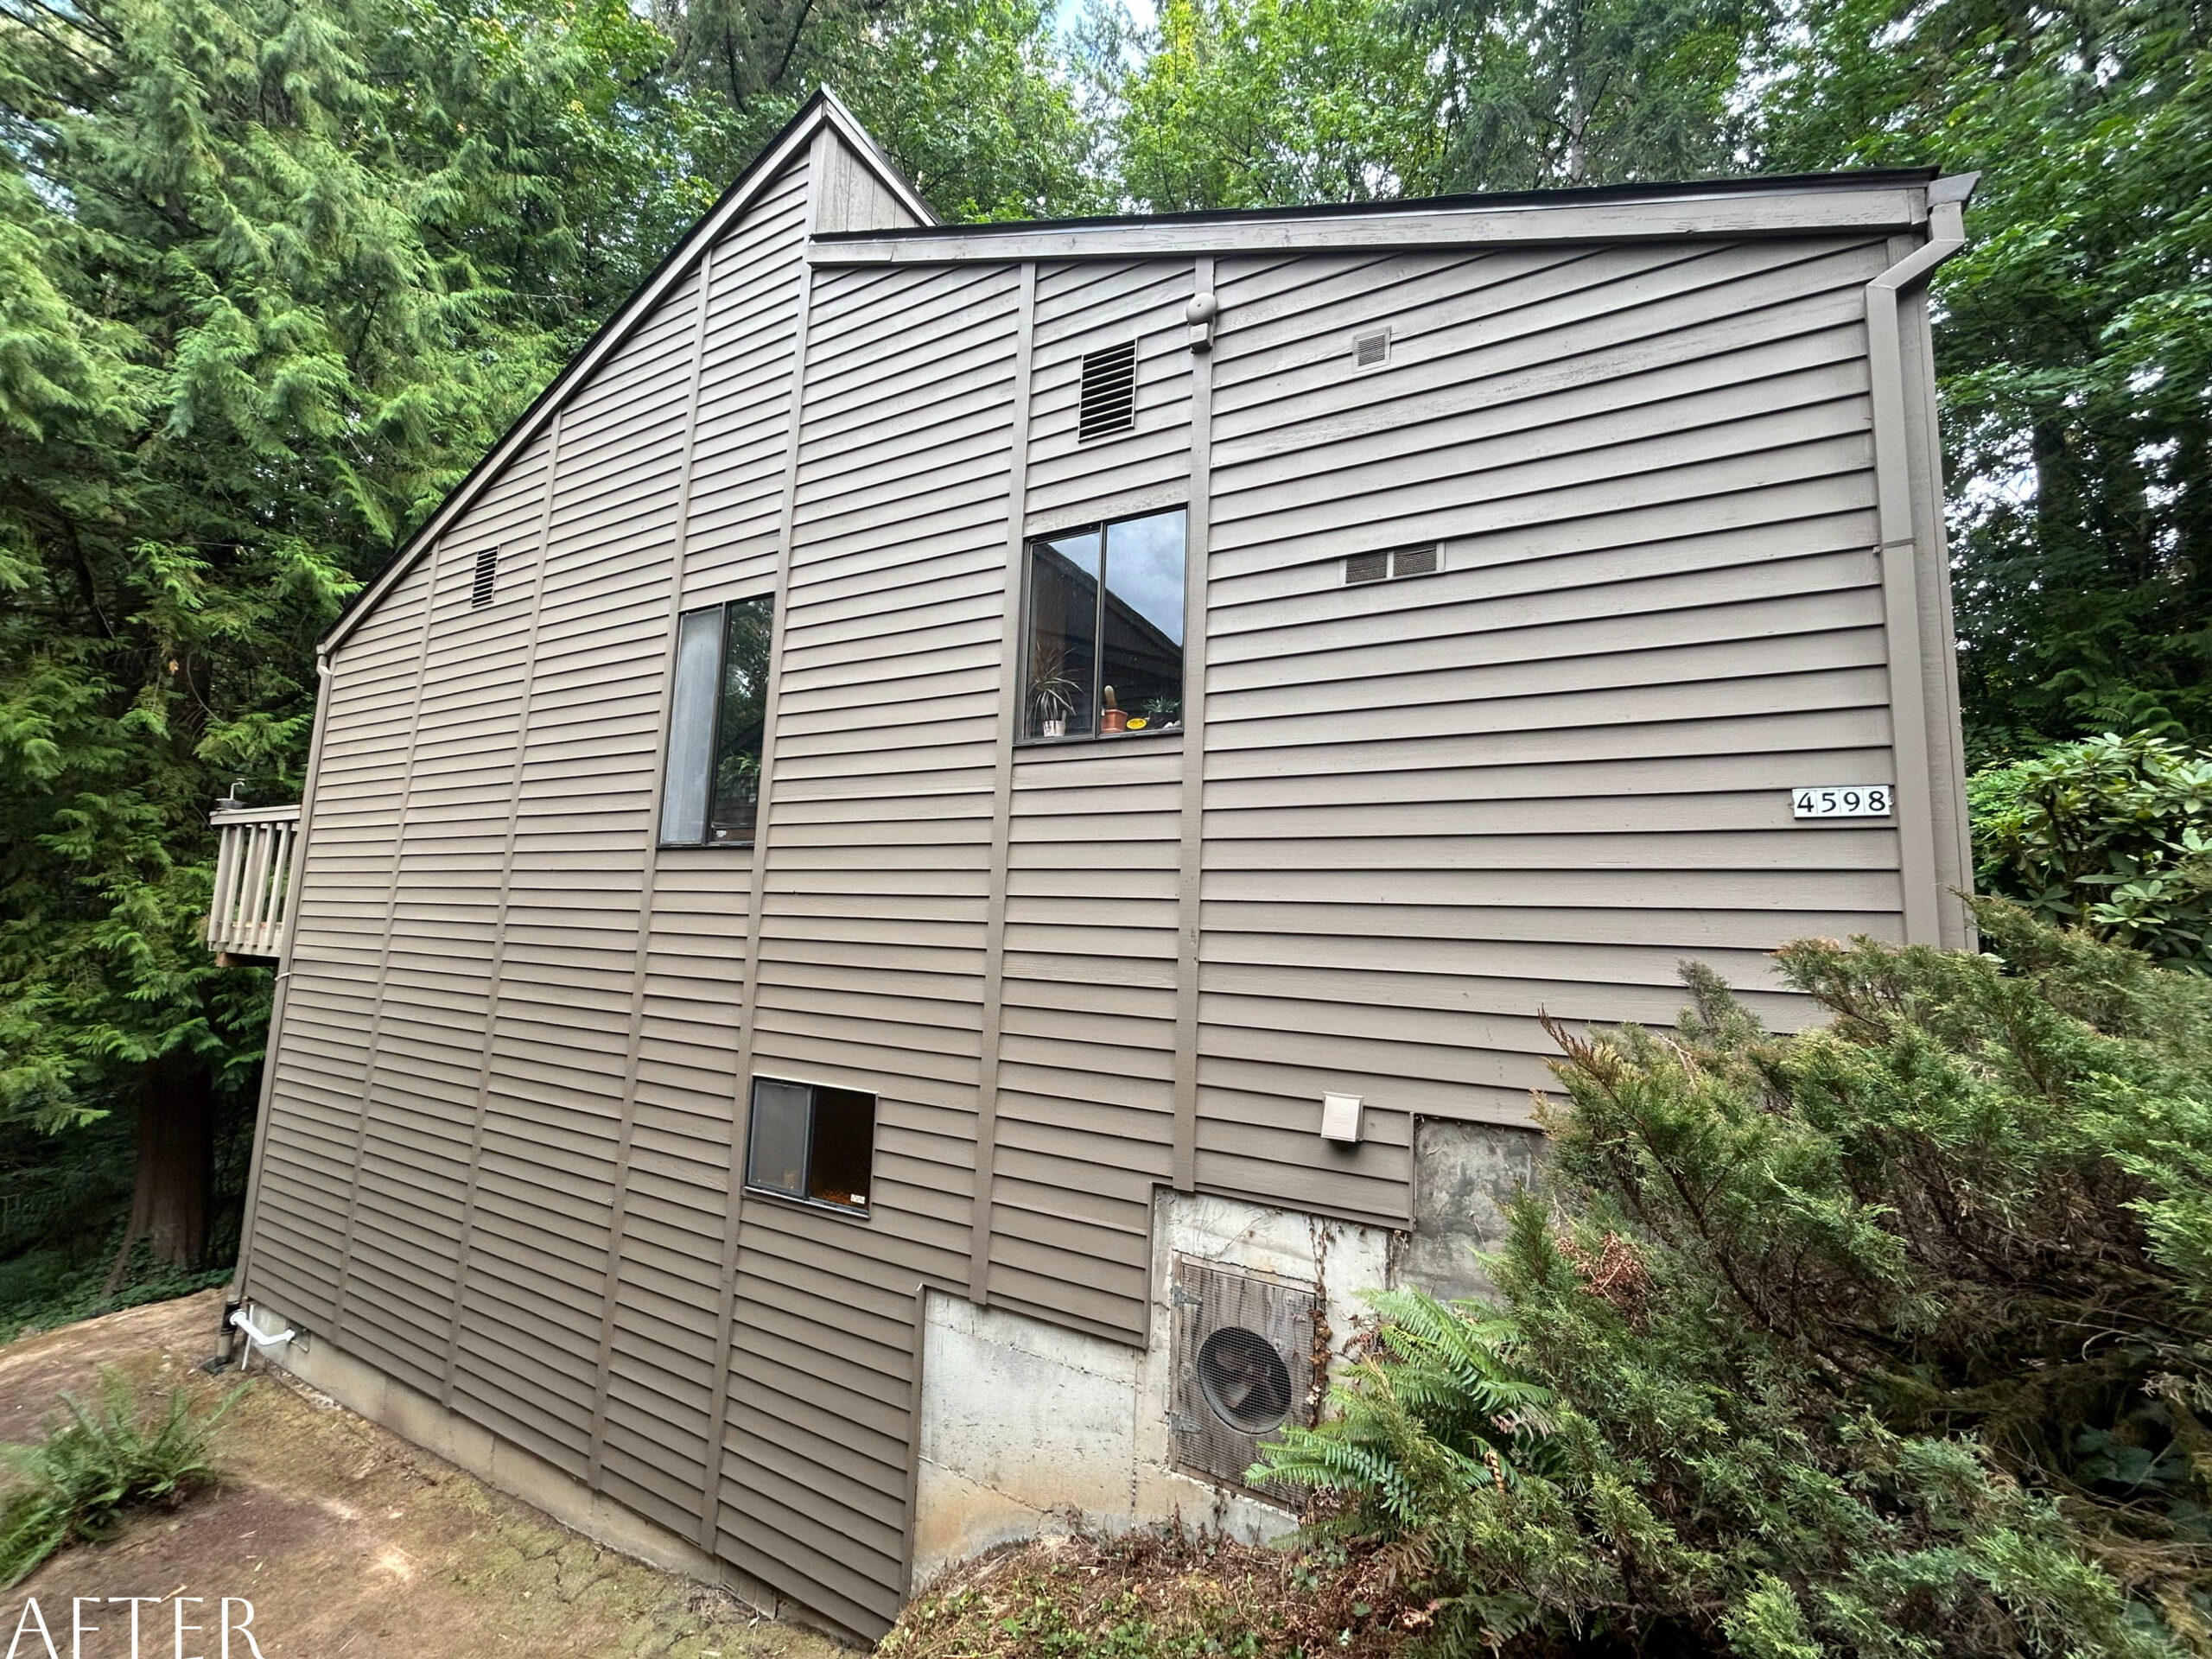 A Portland home in the woods with a brown siding, ready for an exterior paint project to give it a fresh feel.